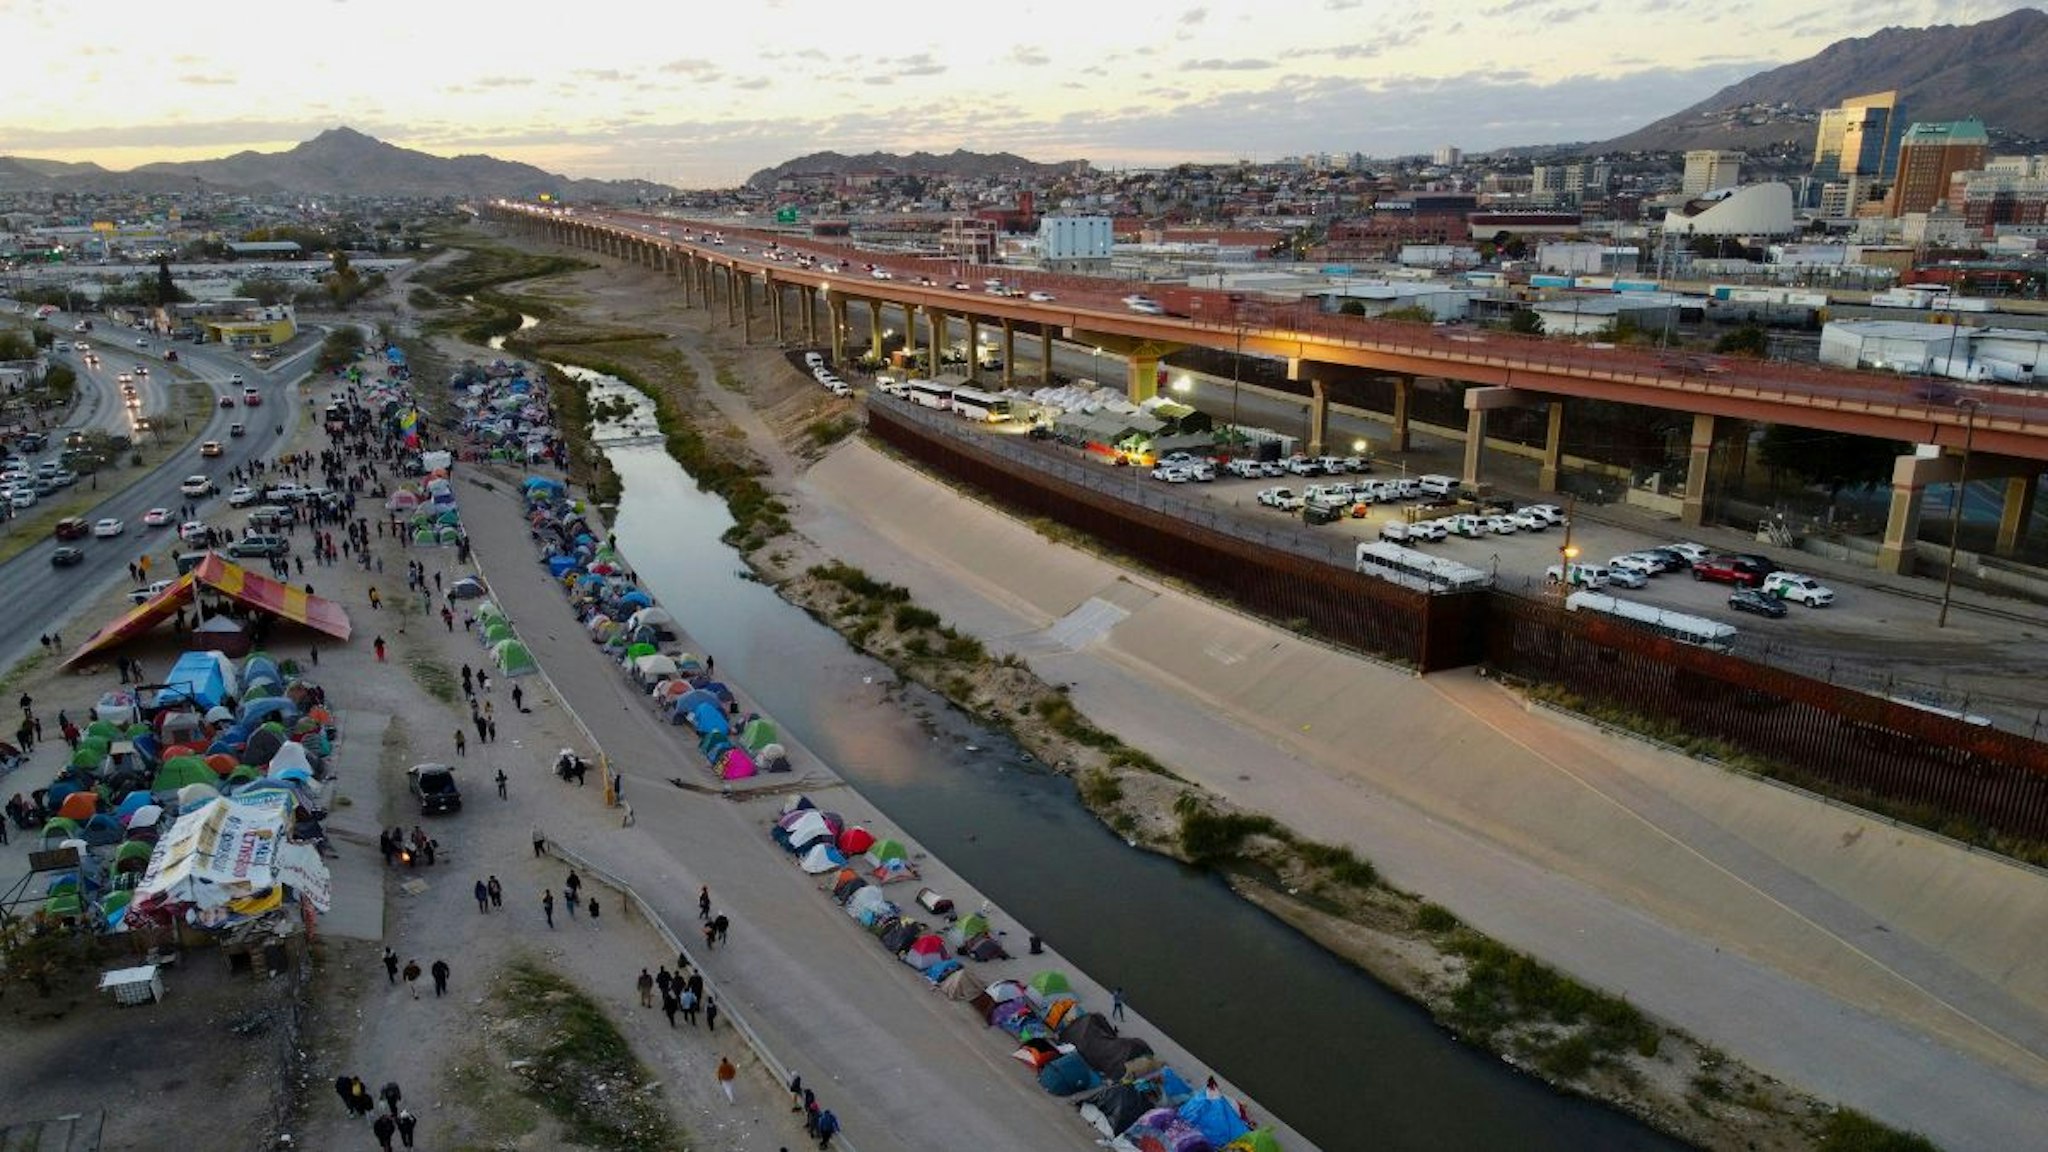 Aerial view of migrants camping on the banks of the Rio Bravo river (or Rio Grande river, as it is called in the US) in Ciudad Juarez, Chihuahua state, Mexico, taken on November 15, 2022.